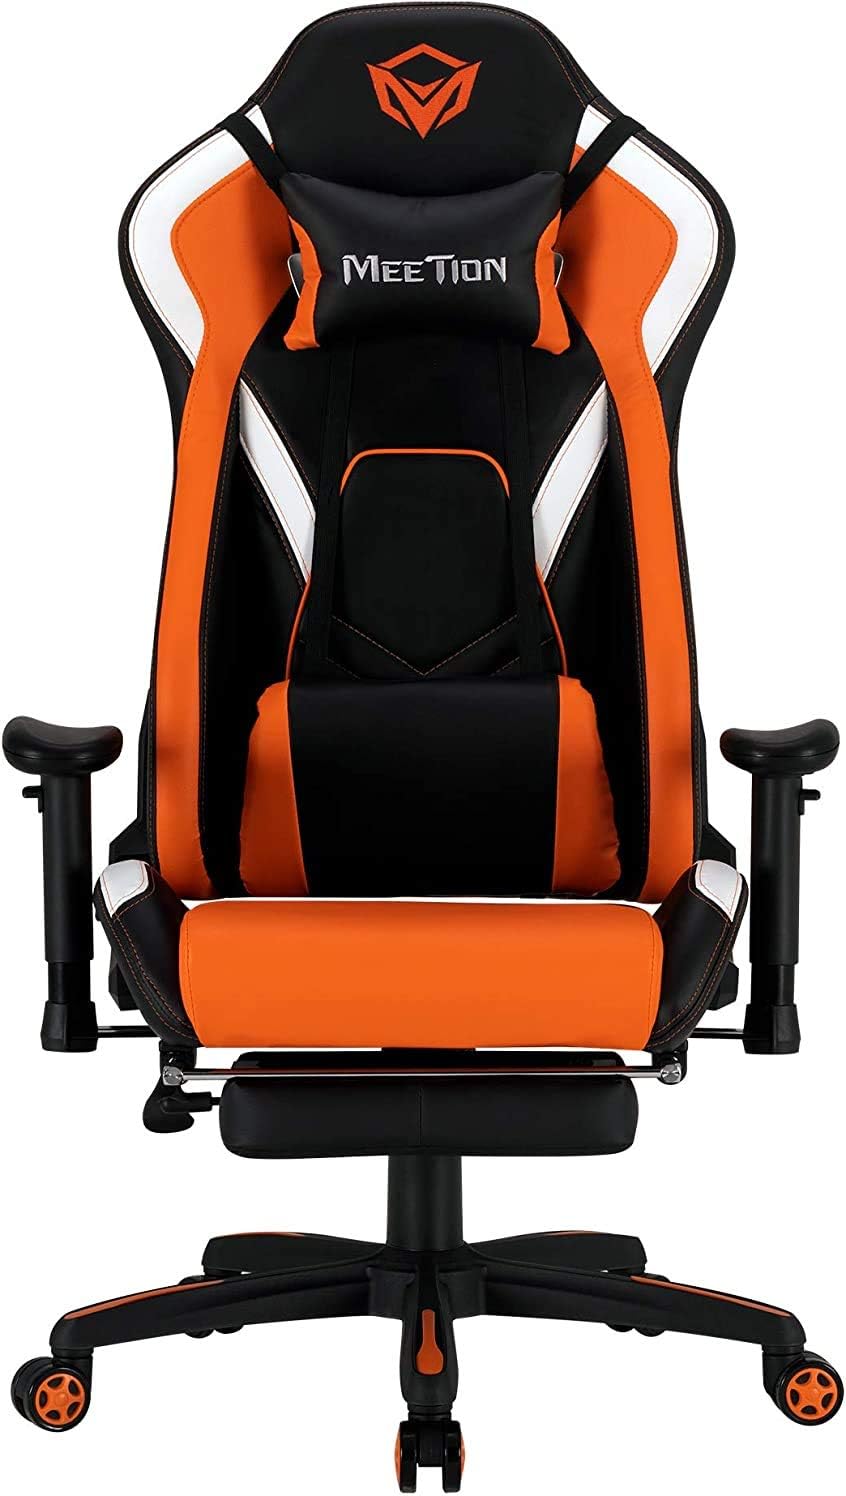 Meetion Gaming Chair, Leather Adjustable Handrail, Scalable Footrest Comfortable Reclining With Chr22, Black And Orange | MT-CHR22